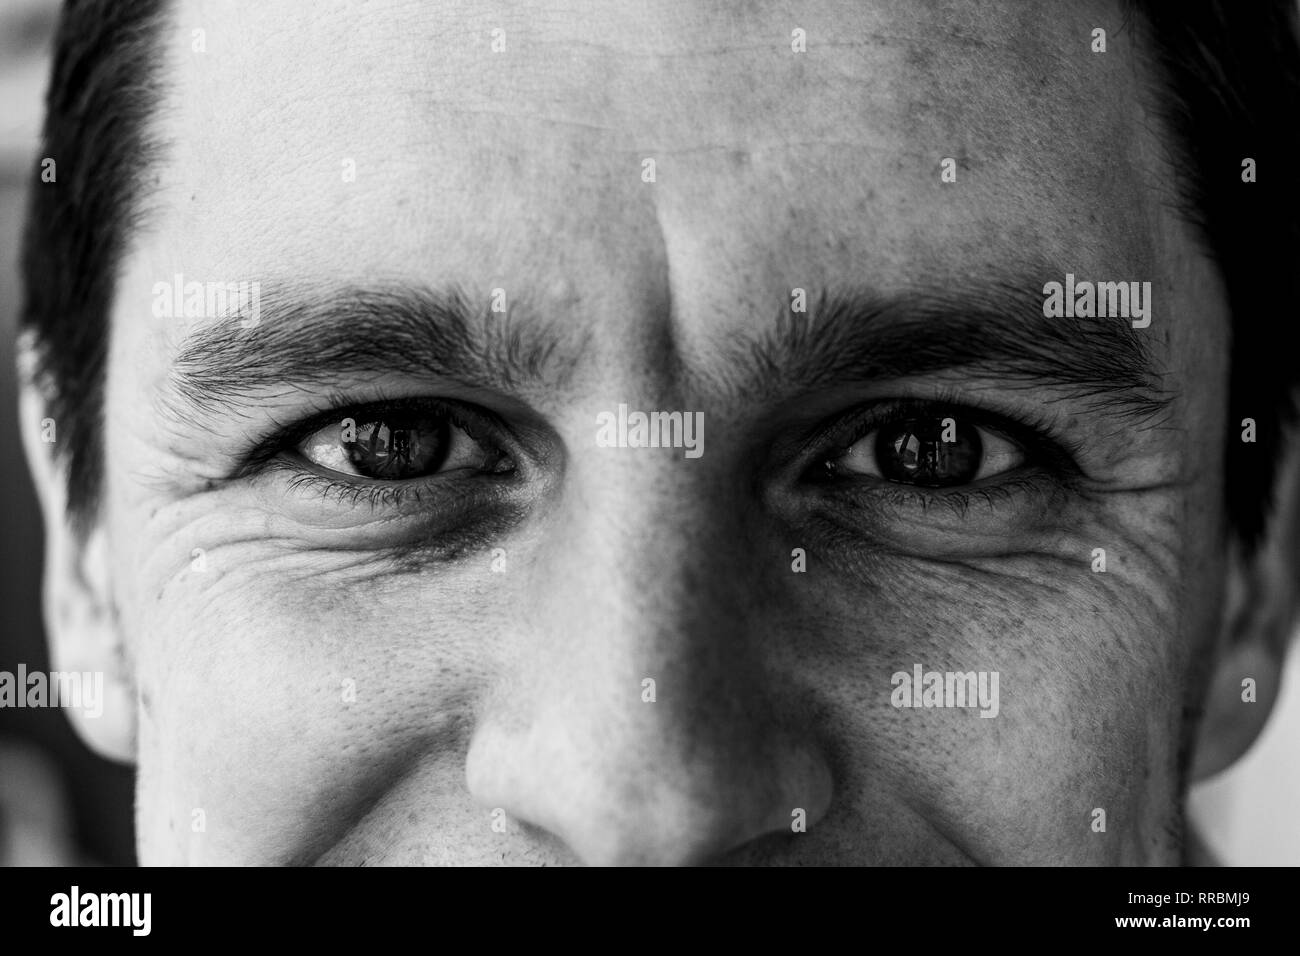 Fragment of a man's face: an eyes and nose to compile an identikit. Fragment of the wrinkled face of a young guy. Smiling eyes of a man. Black and whi Stock Photo